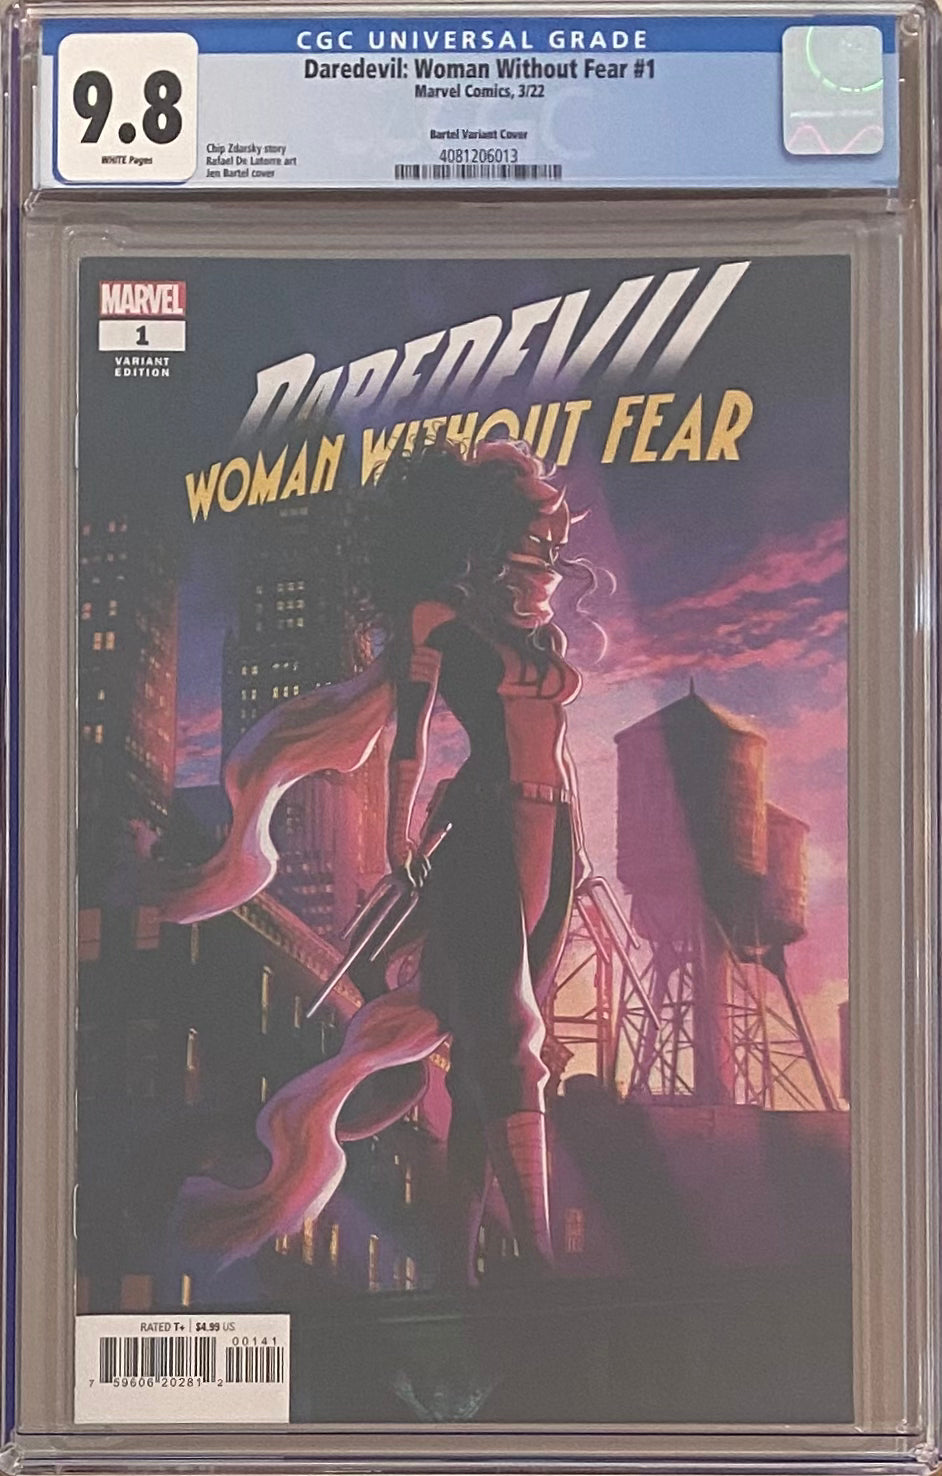 Daredevil: Woman Without Fear #1 Bartel 1:50 Retailer Incentive Variant CGC 9.8